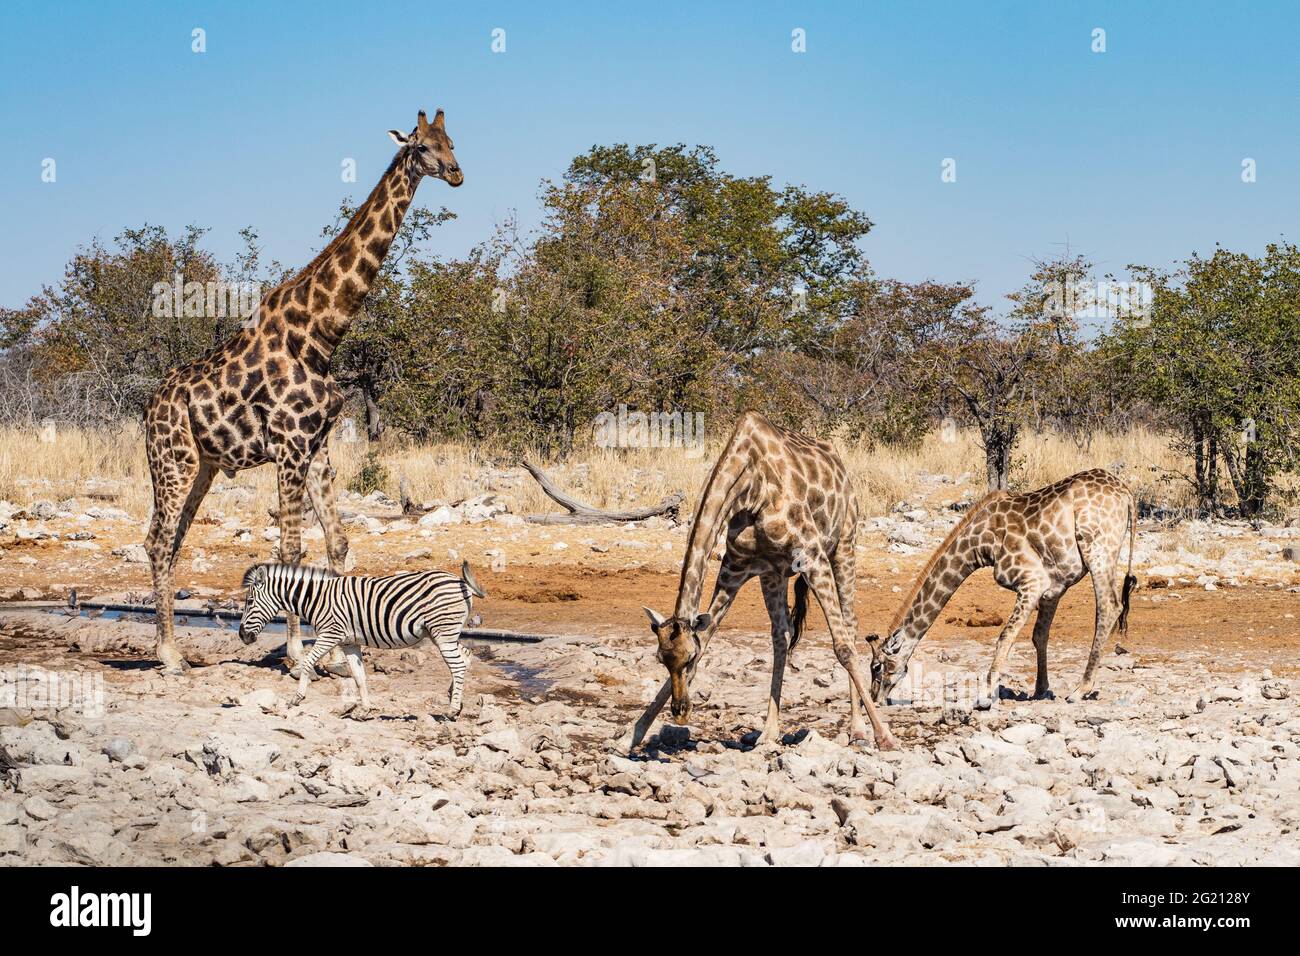 Meeting at a waterhole in Etosha National Park, Namibia: two giraffes drinking while the third giraffe watches out. A zebra walks by Stock Photo